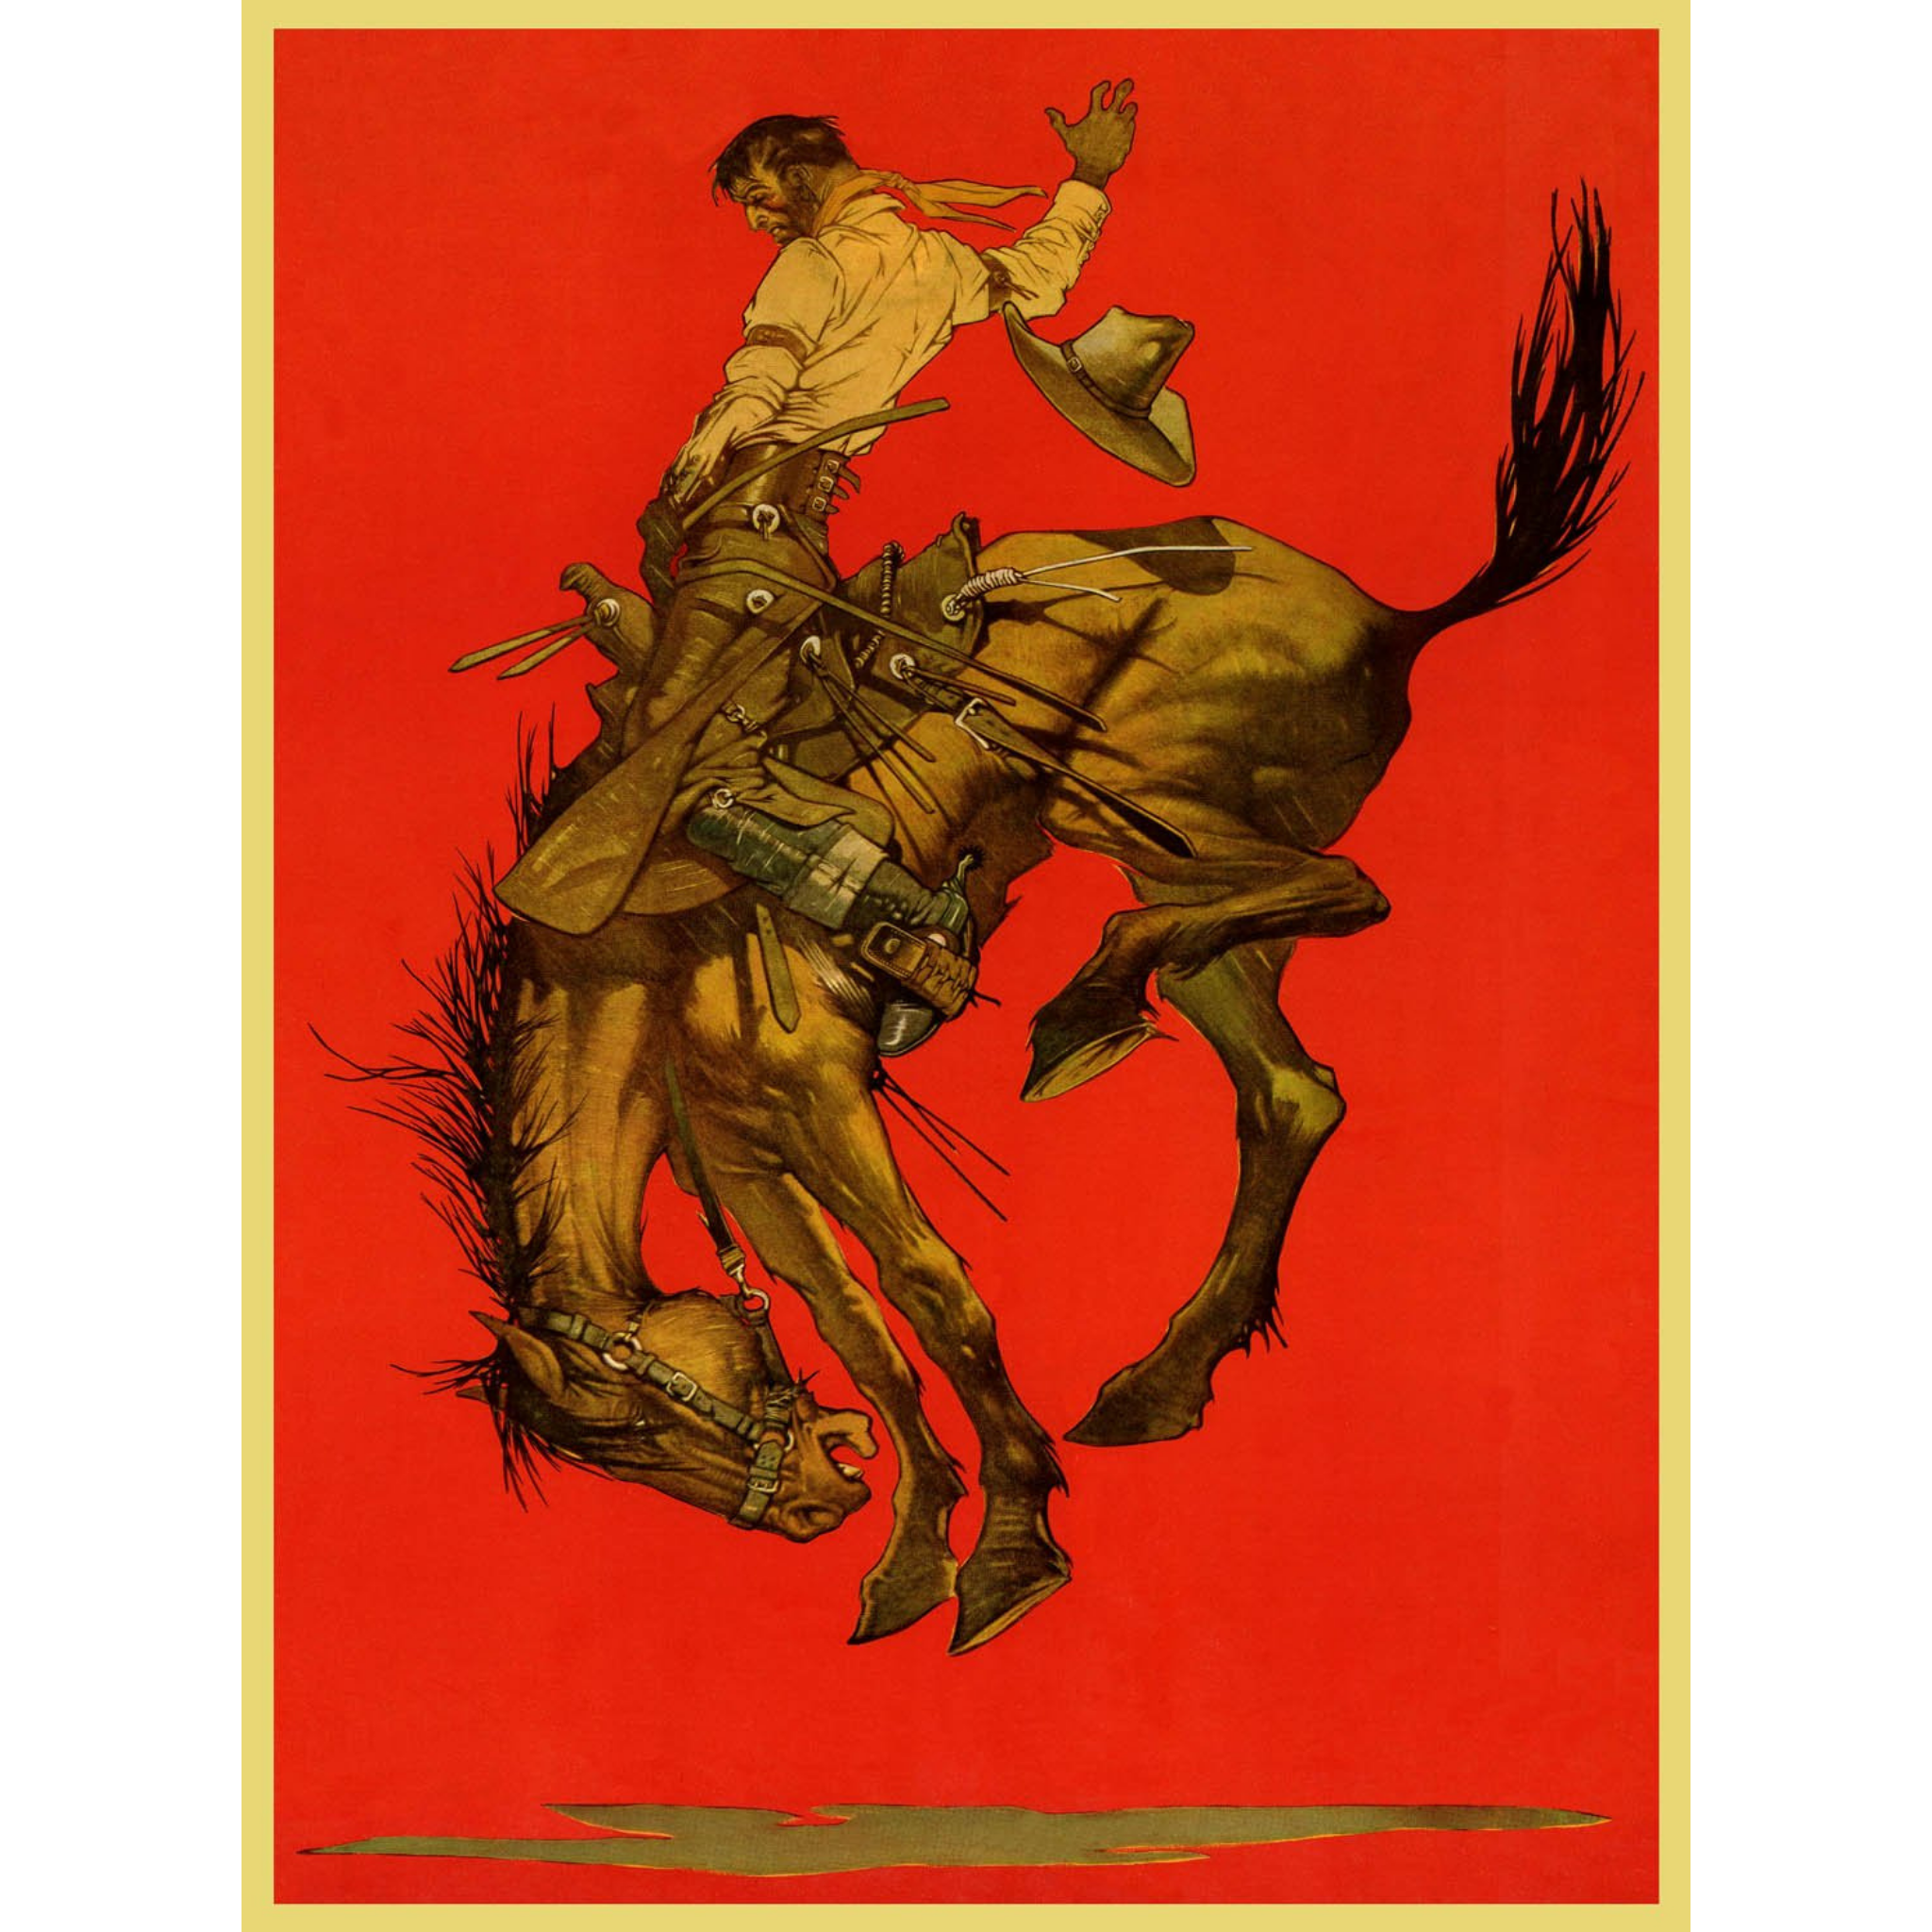 Cowboy on Bucking Bronco Rodeo Poster - Red - ca. 1935 Lithograph